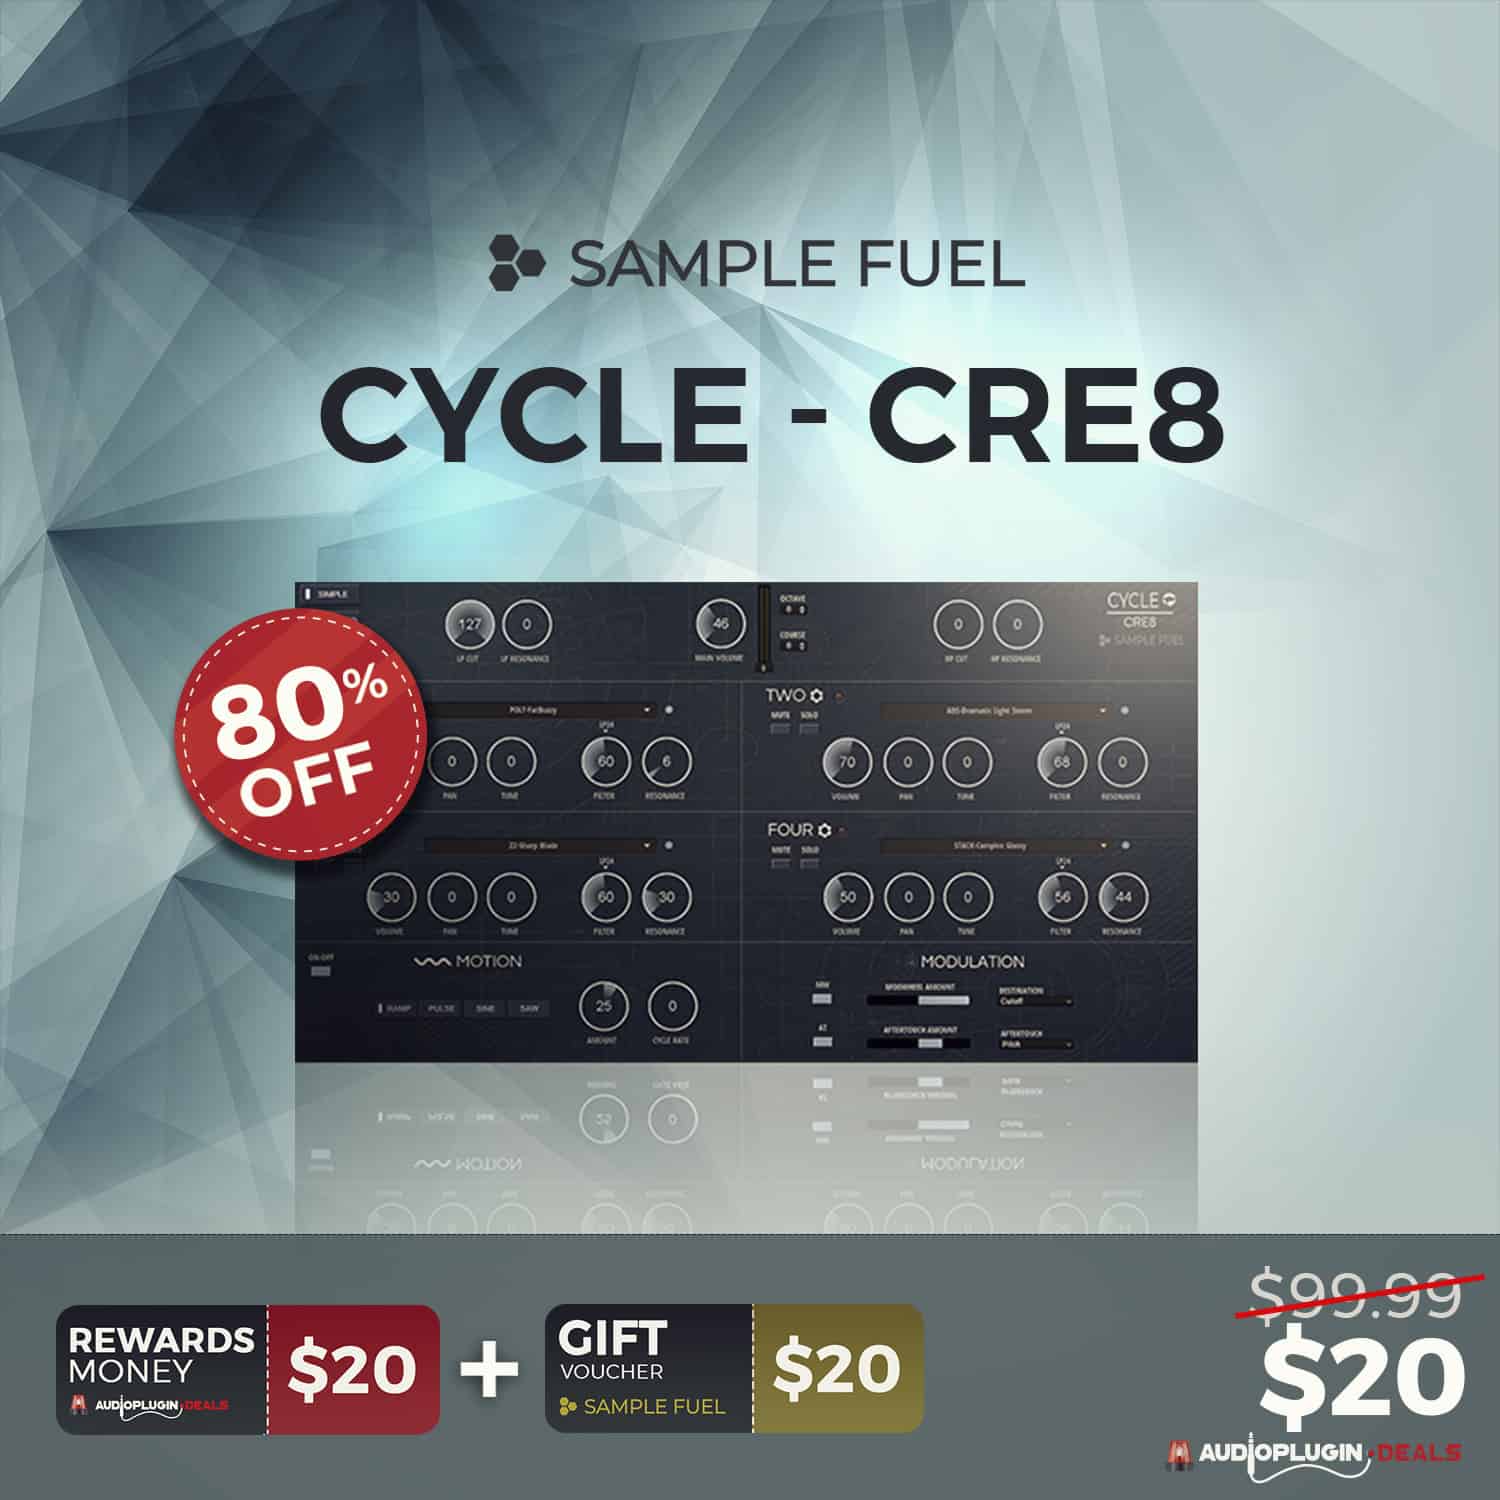 80% OFF Cycle-CRE8 by Sample Fuel + $20 Sample Fuel Voucher